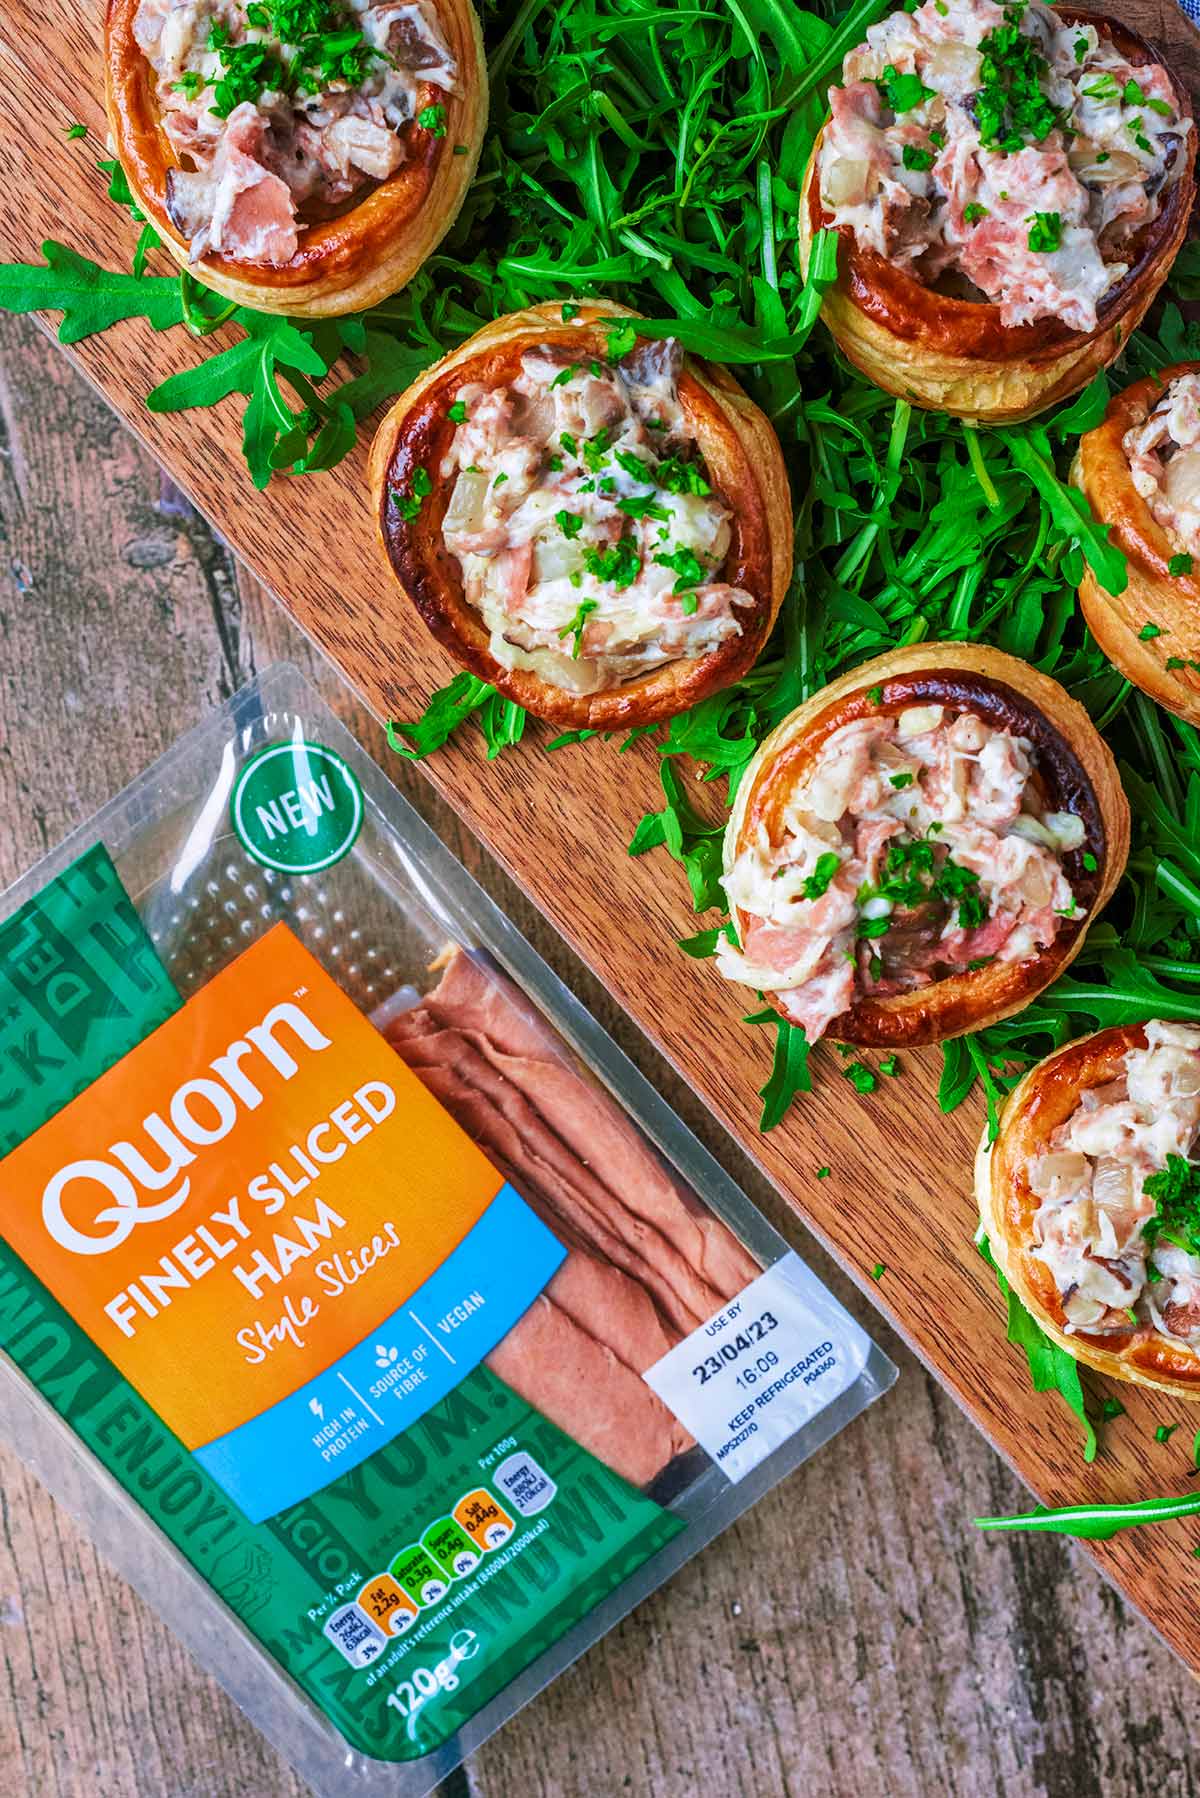 Vol au vents on a board next to a pack of Quorn ham.